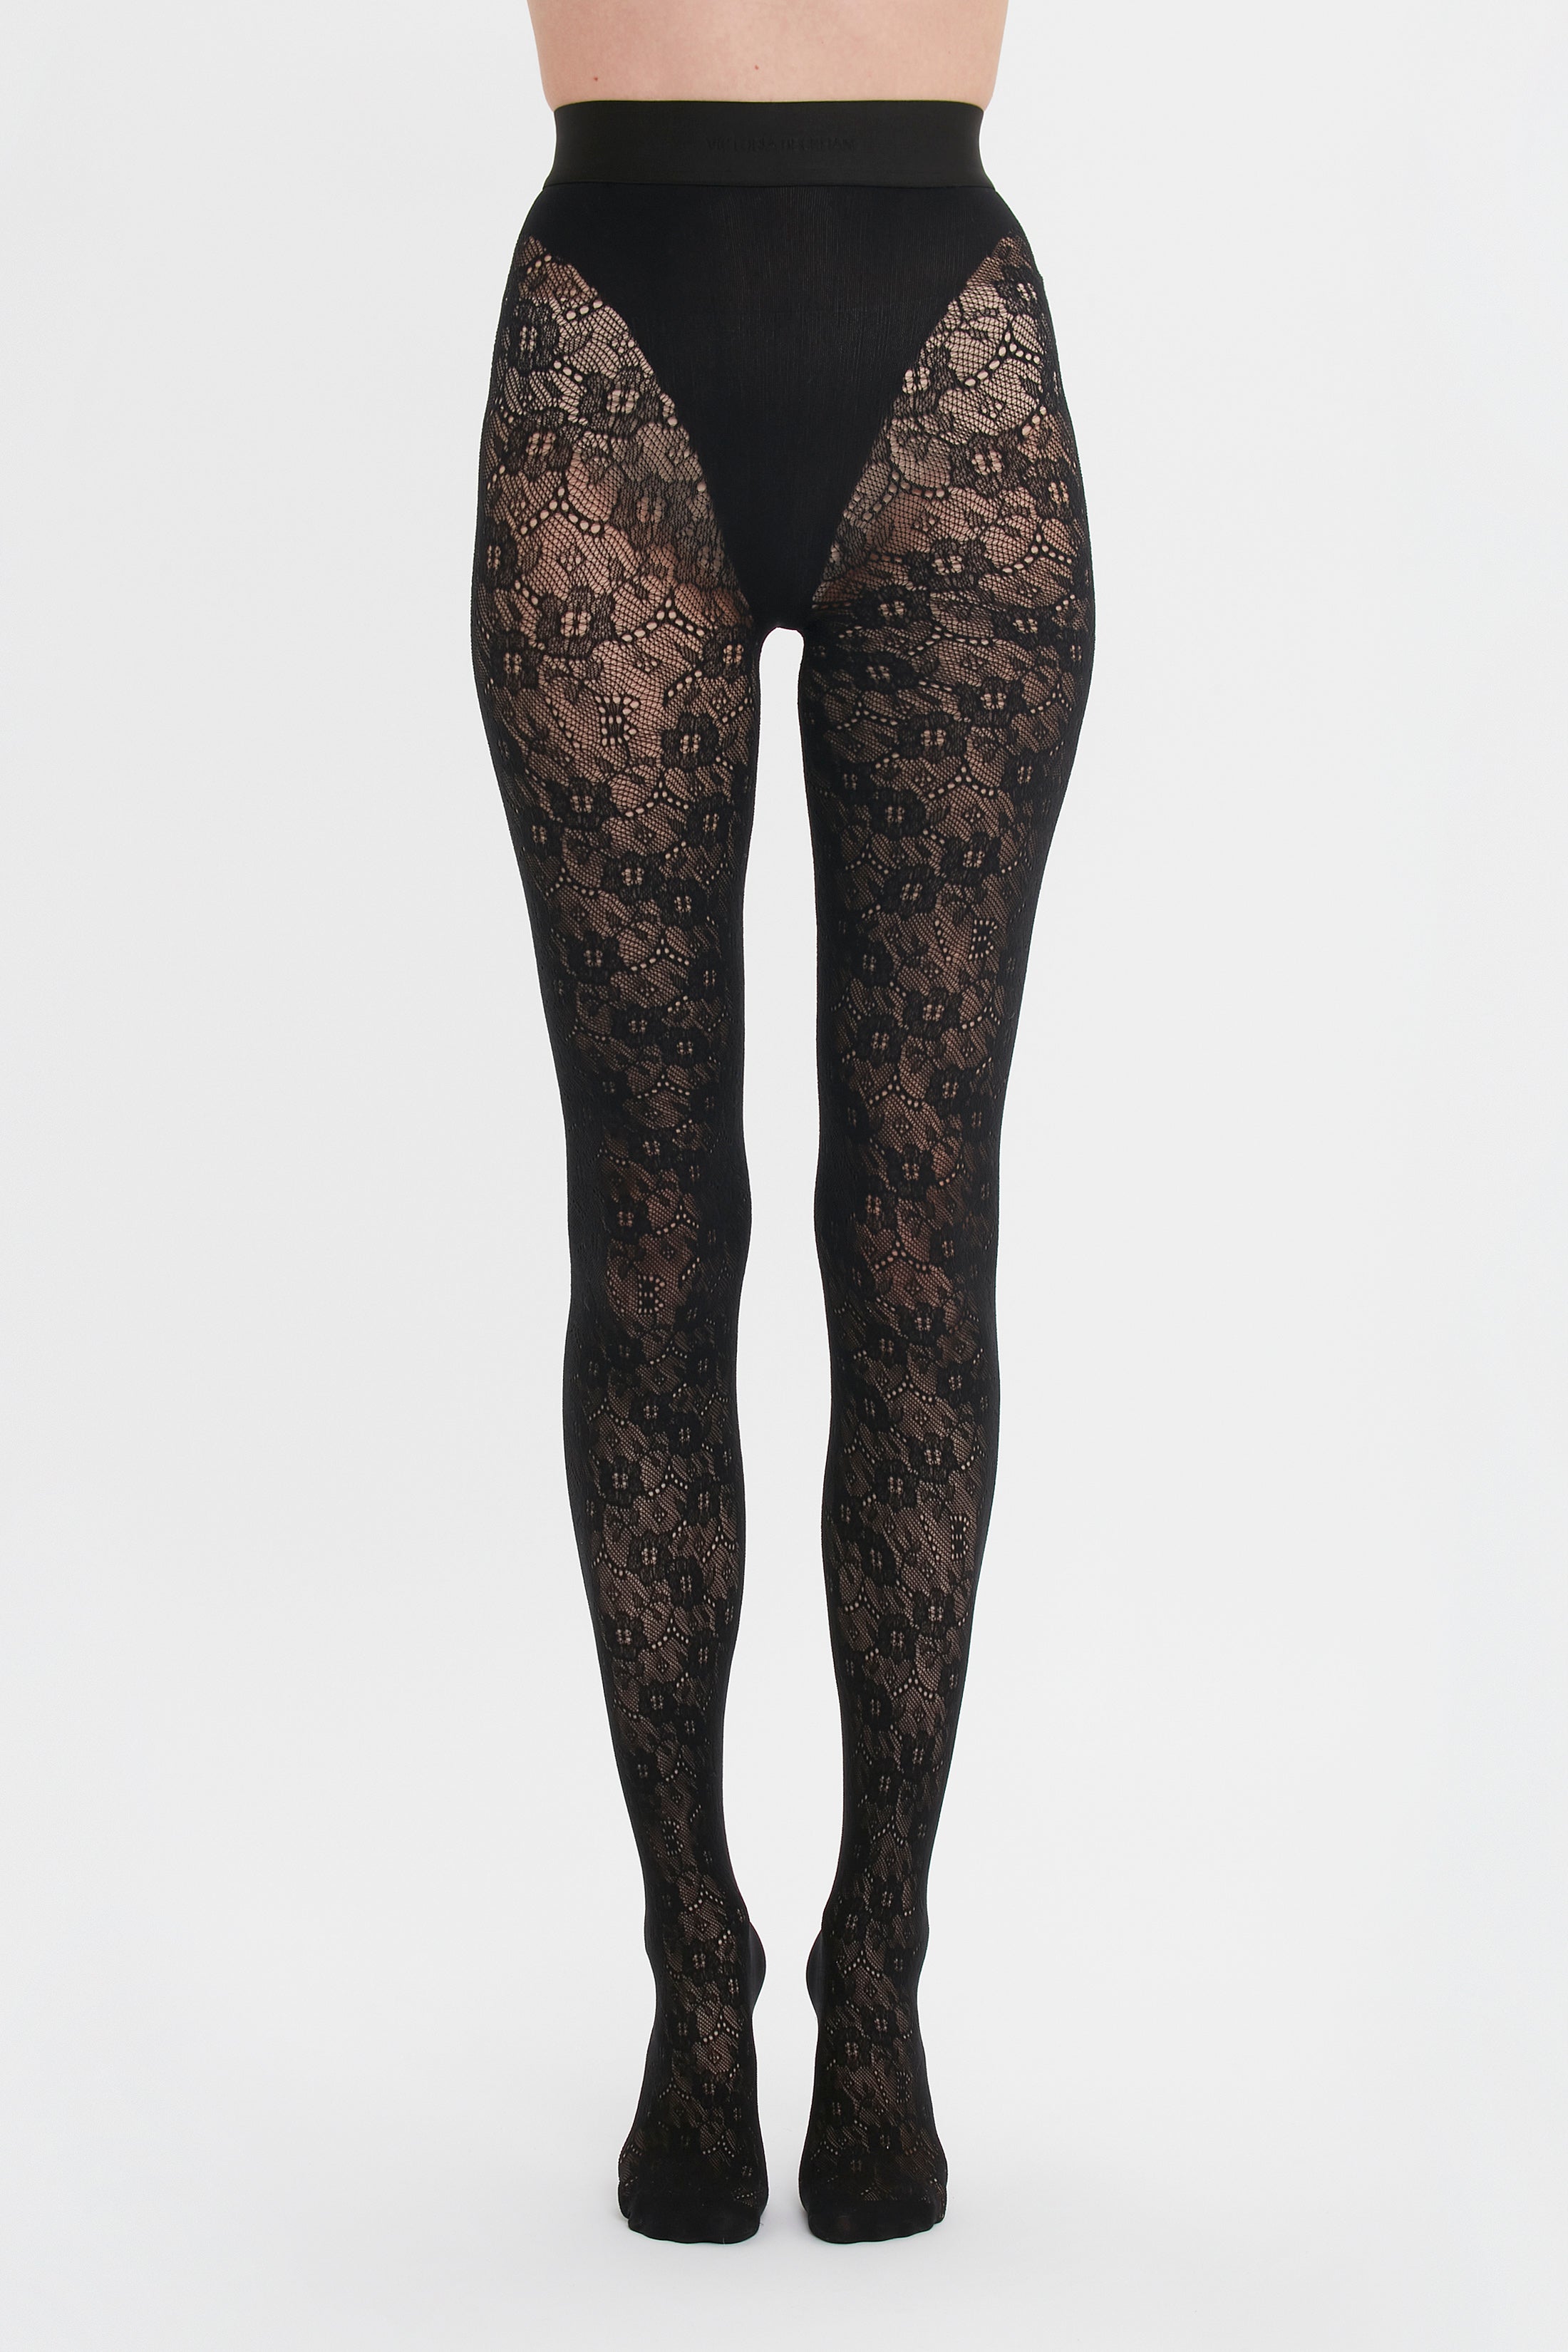 Victoria's Secret A Pantyhose and Tights for Women for sale